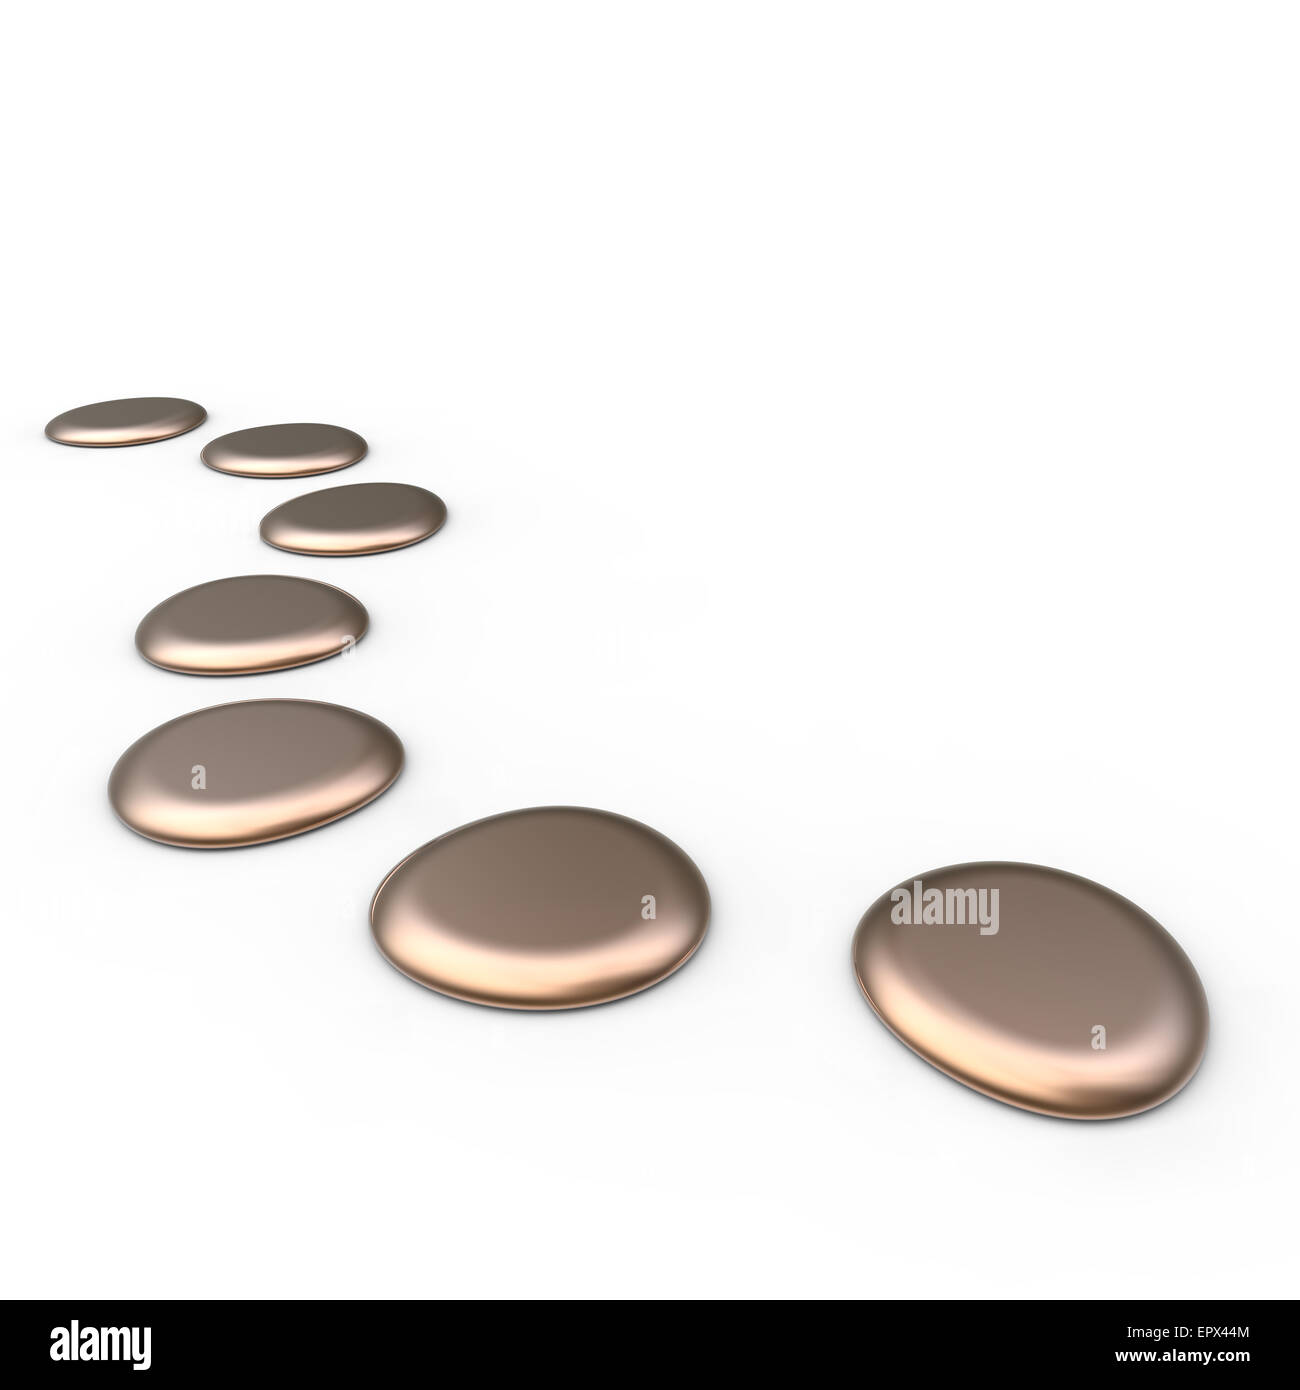 Winding path with copper colored stepping stones on a white background Stock Photo